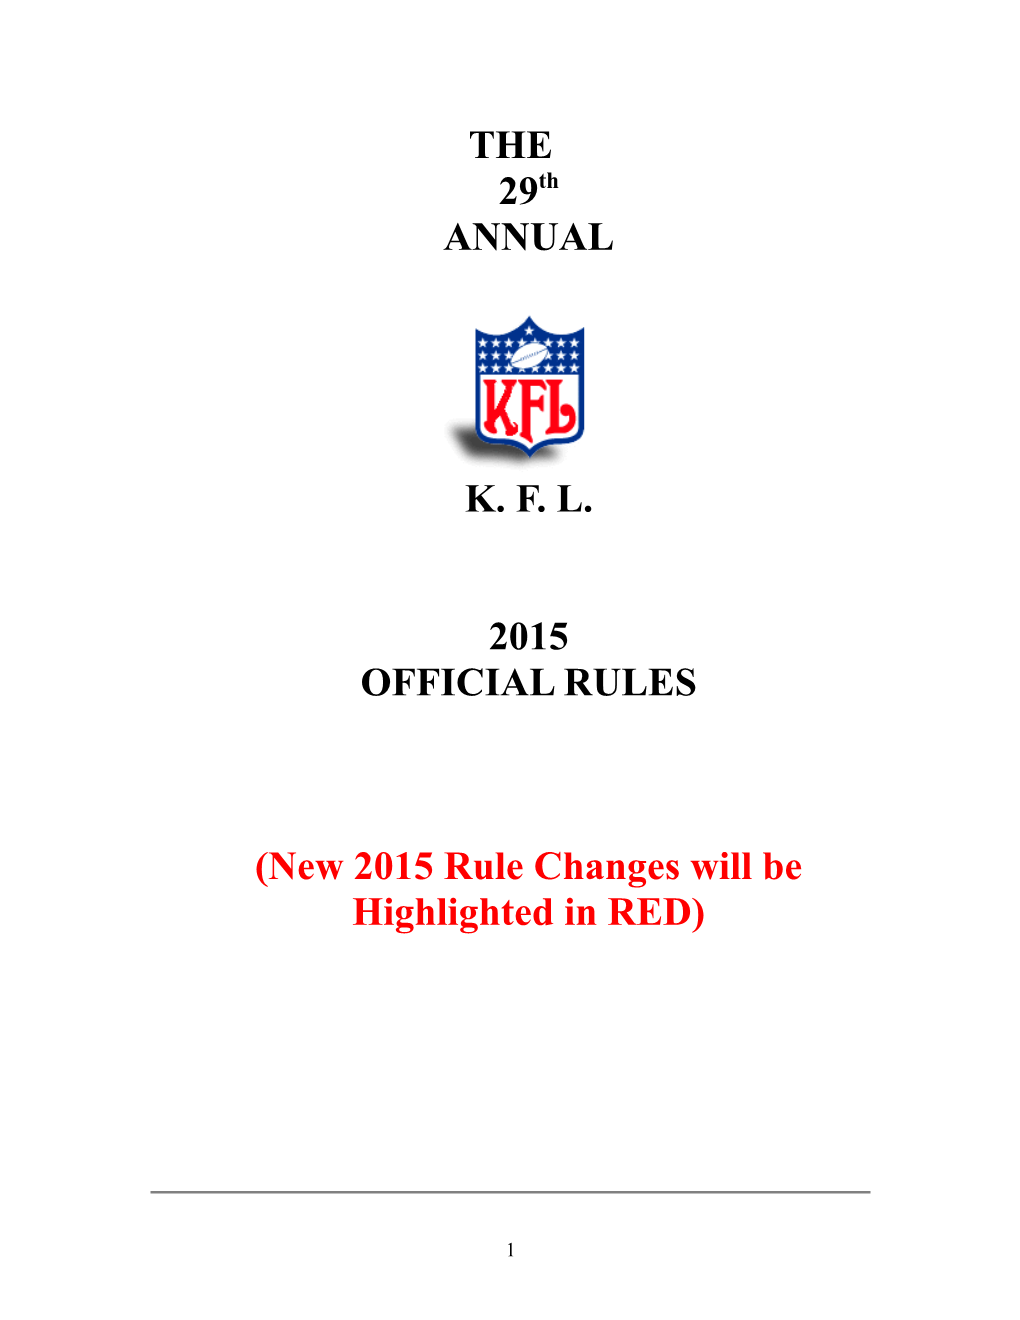 The29thannualk. F. L.2015OFFICIAL RULES(New 2015 Rule Changes Will Be Highlighted in RED)